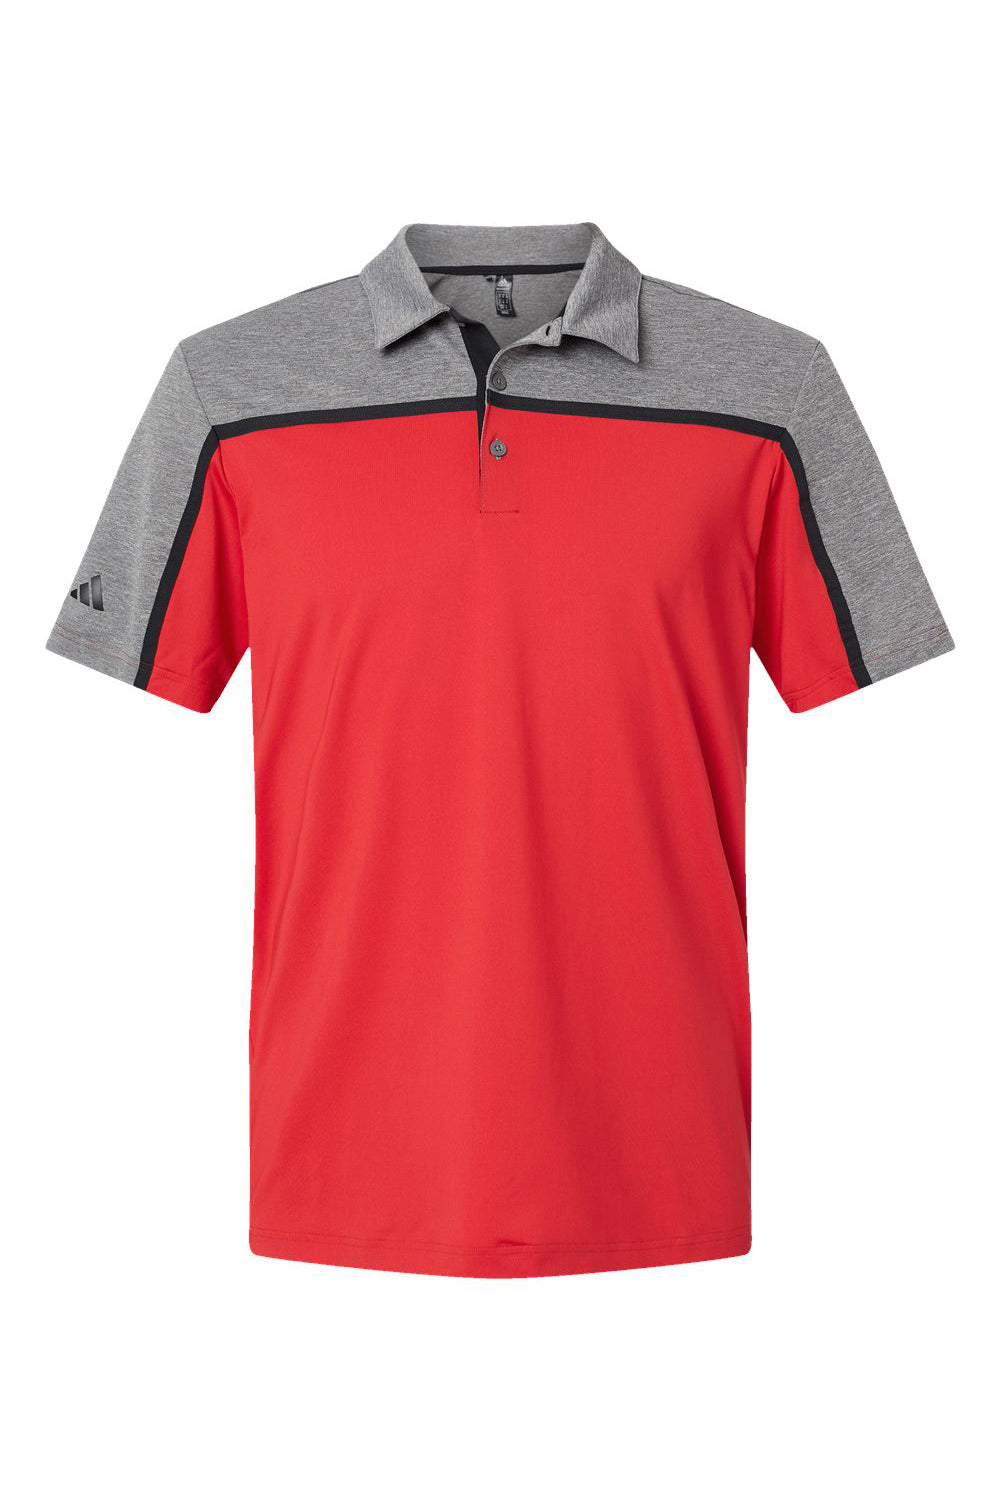 Adidas A512 Mens Ultimate Colorblocked Short Sleeve Polo Shirt Collegiate Red/Black/Grey Melange Flat Front